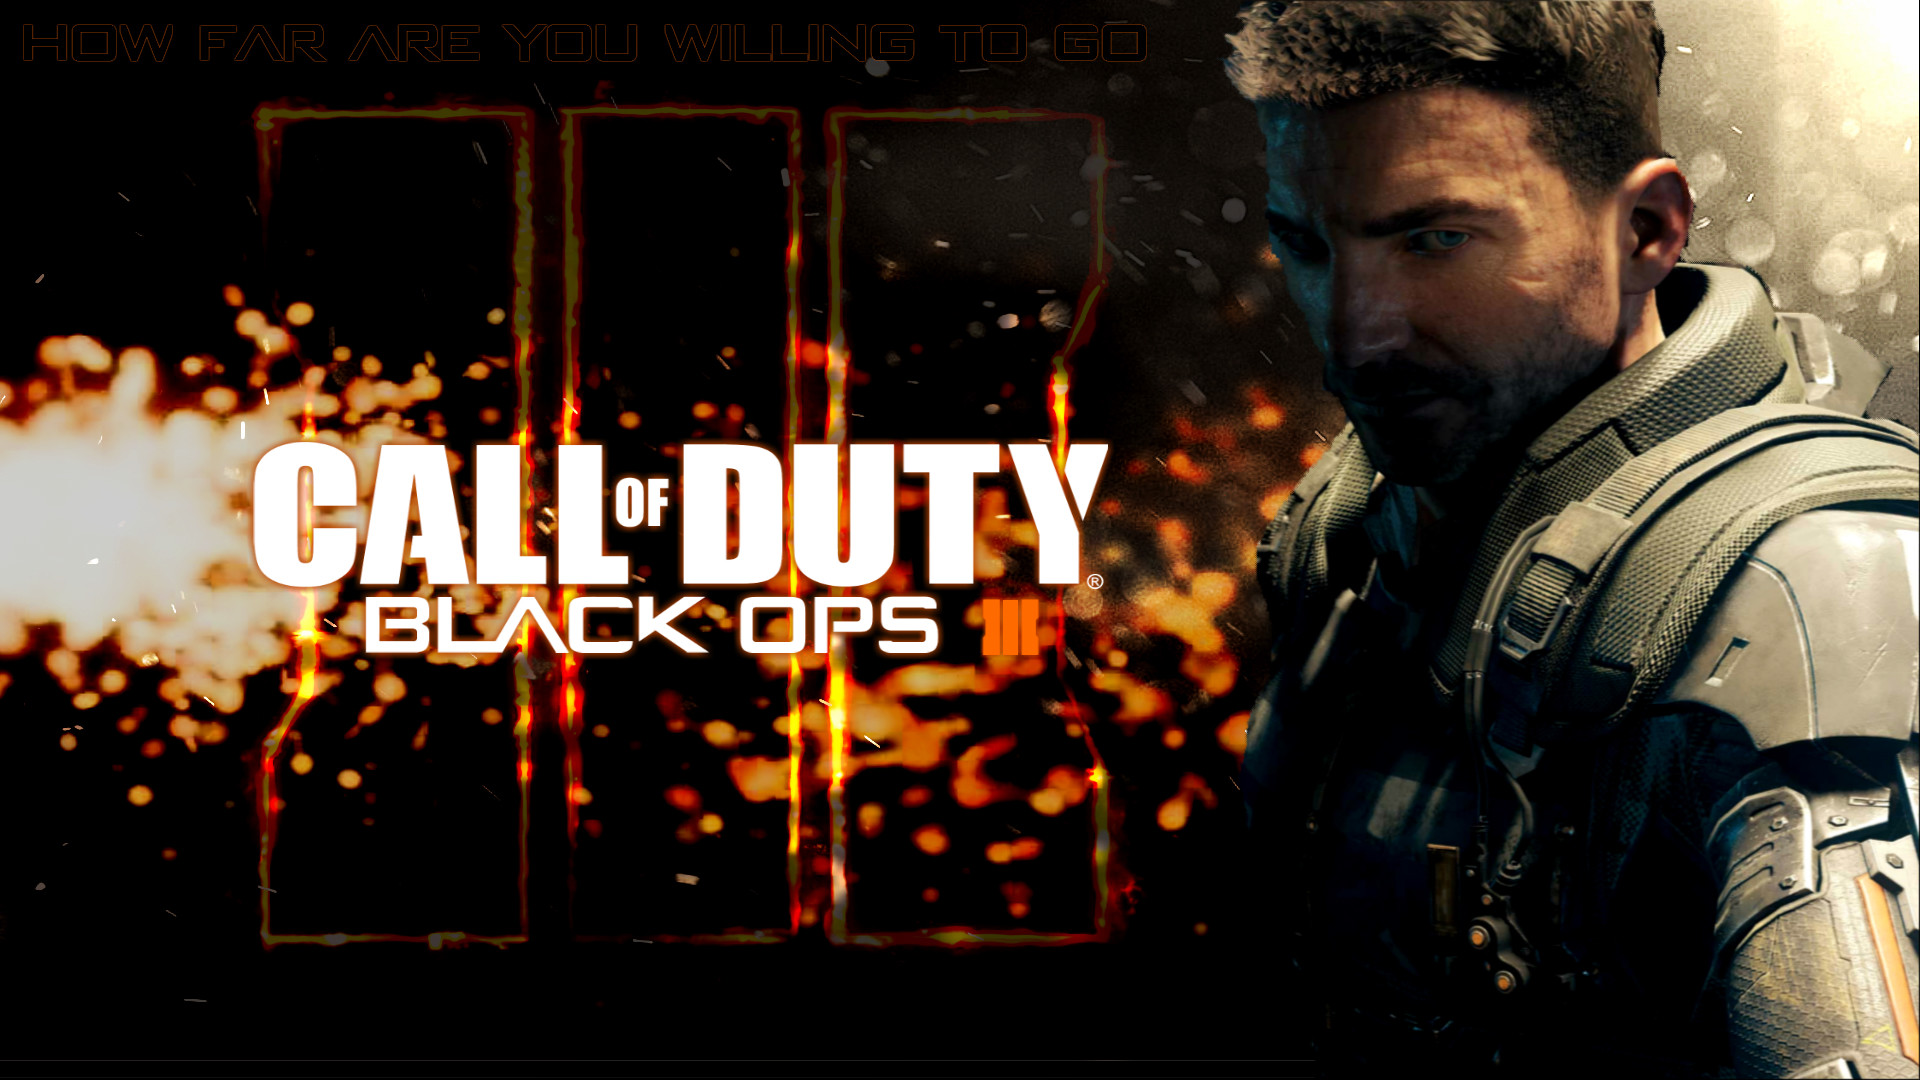 1920x1080 Call of Duty Black Ops III Wallpapers Pictures Images